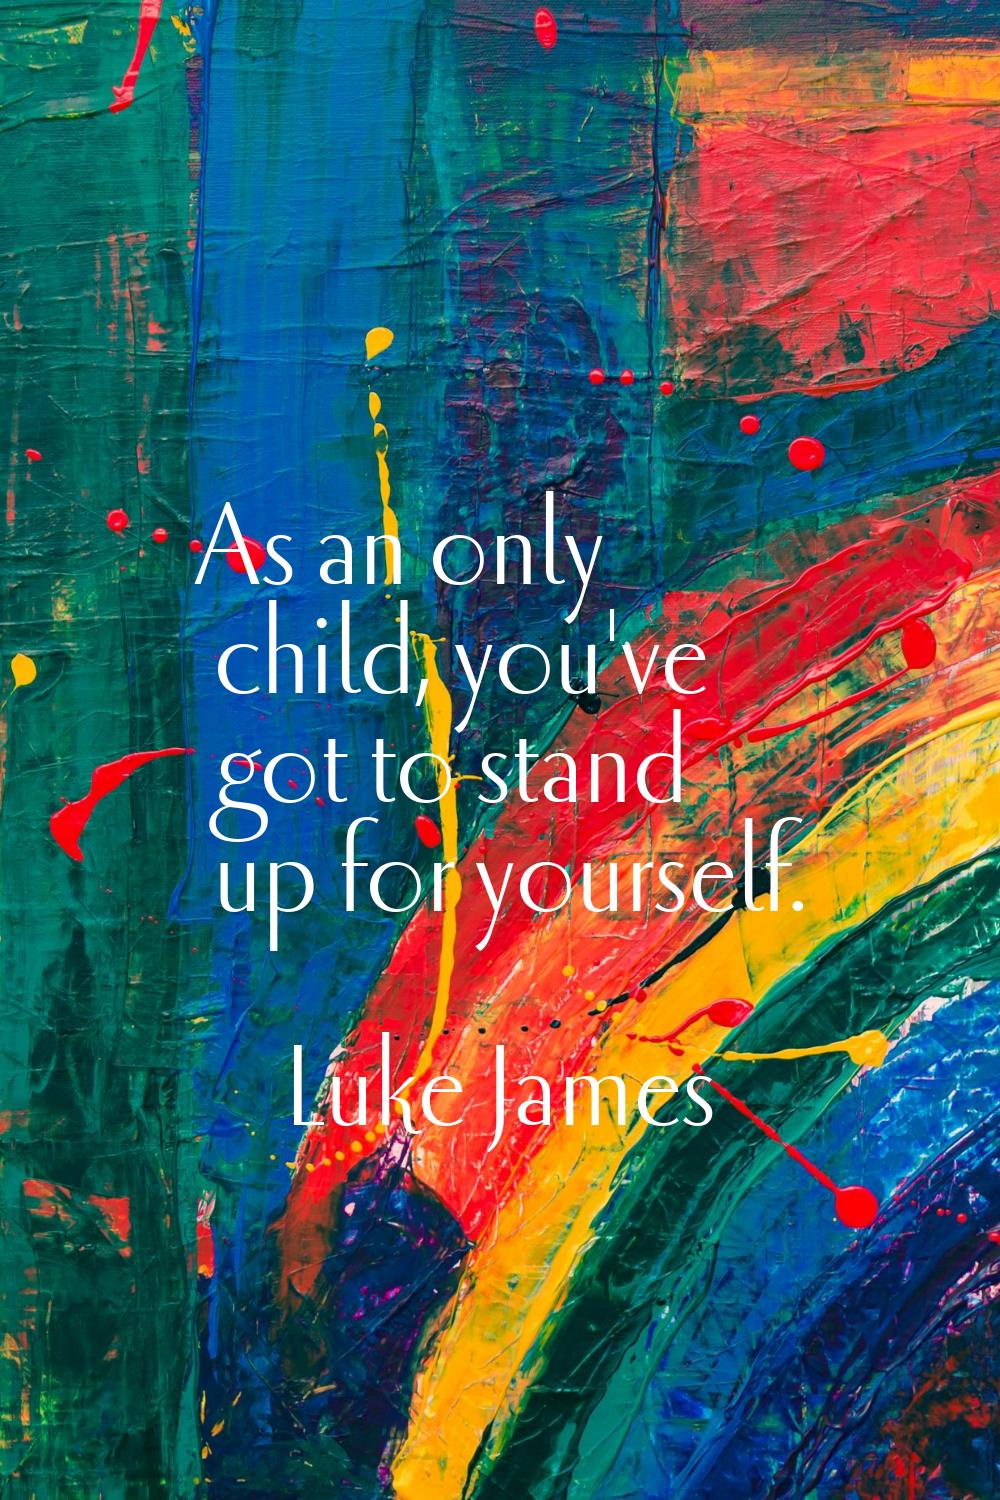 As an only child, you've got to stand up for yourself.